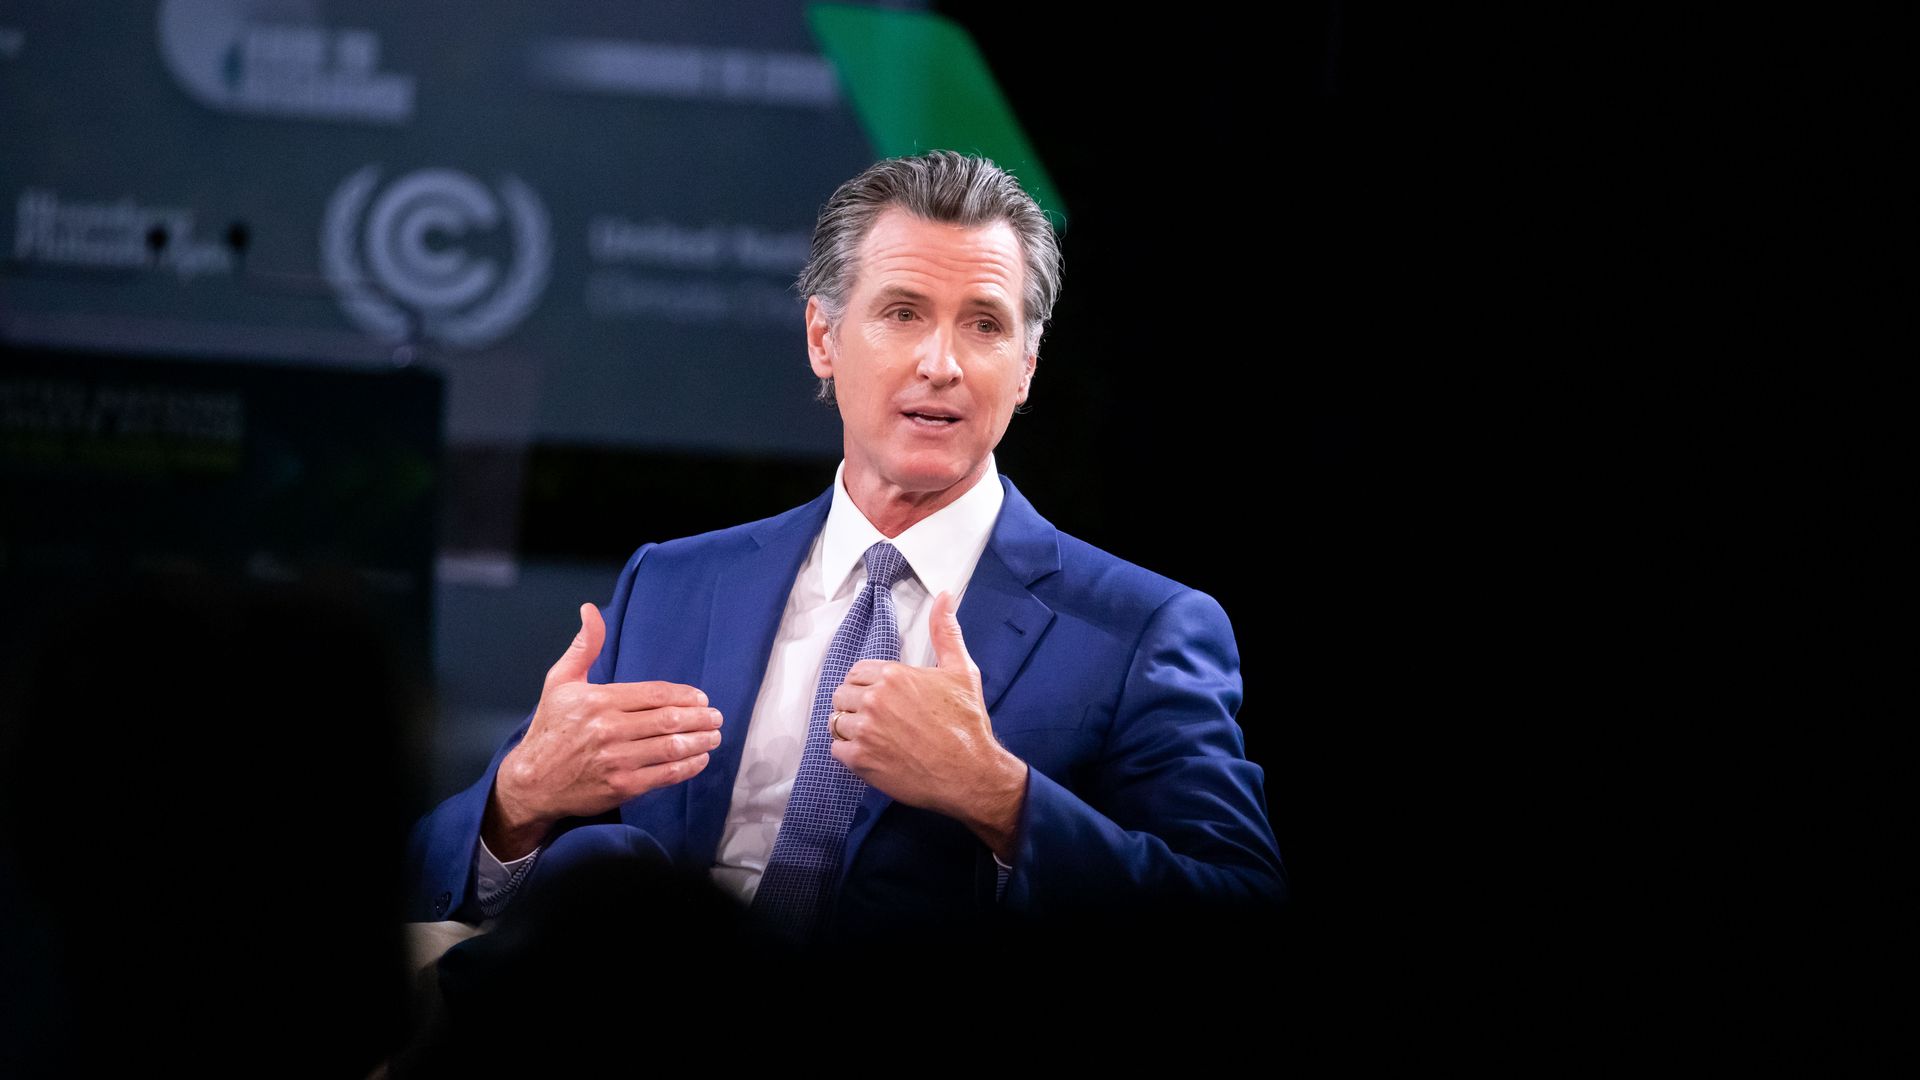 Photo of Gavin Newsom speaking while gesturing with his hands